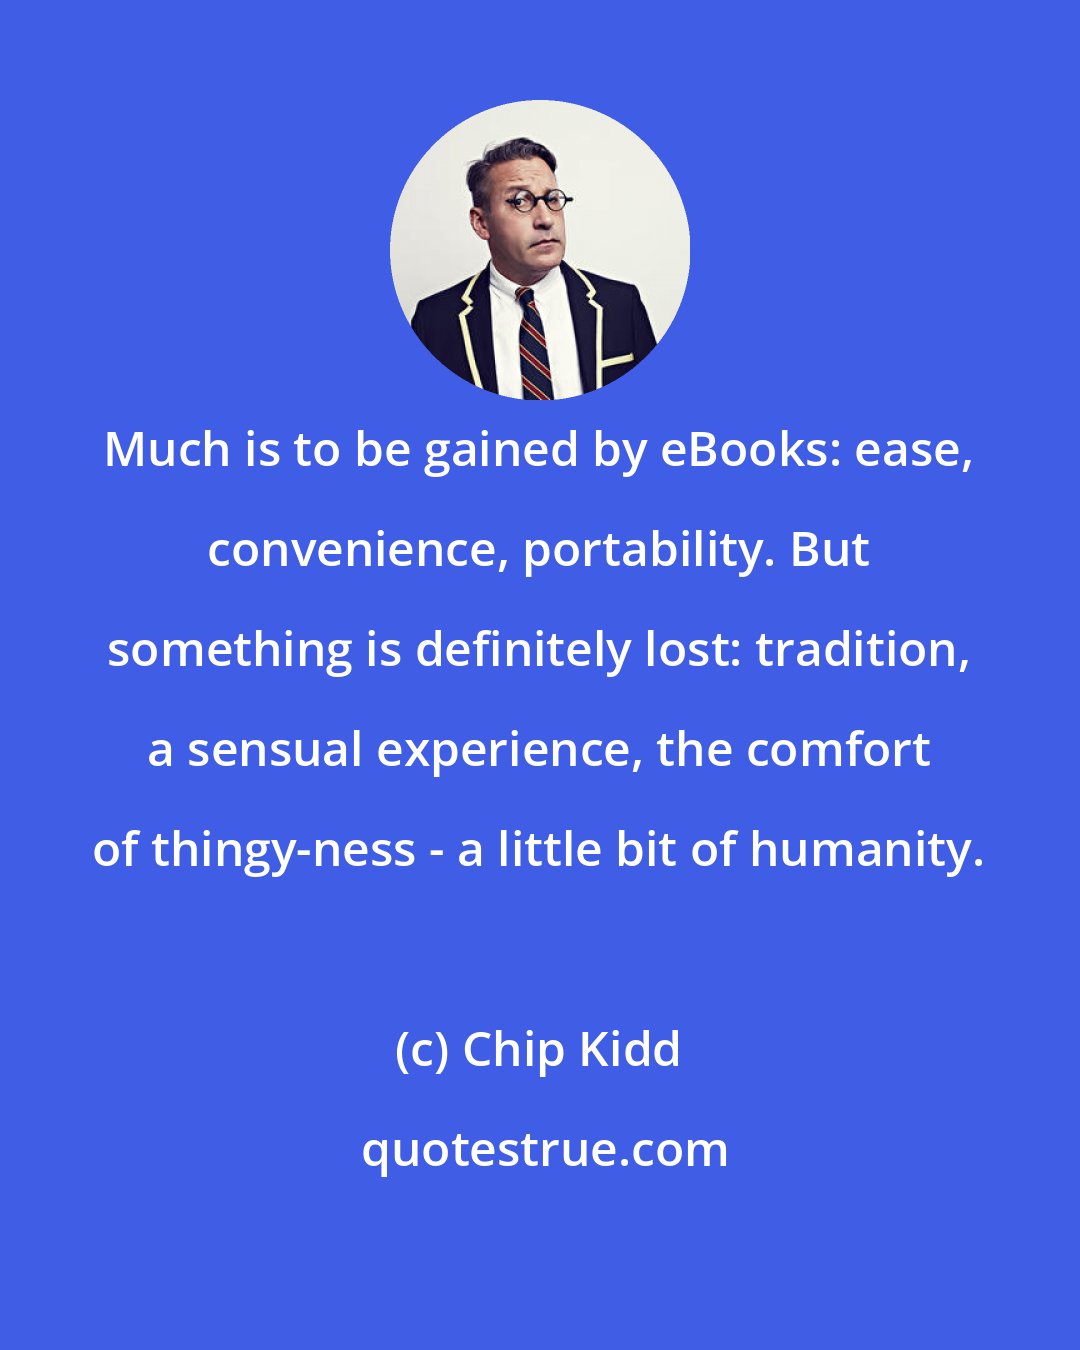 Chip Kidd: Much is to be gained by eBooks: ease, convenience, portability. But something is definitely lost: tradition, a sensual experience, the comfort of thingy-ness - a little bit of humanity.